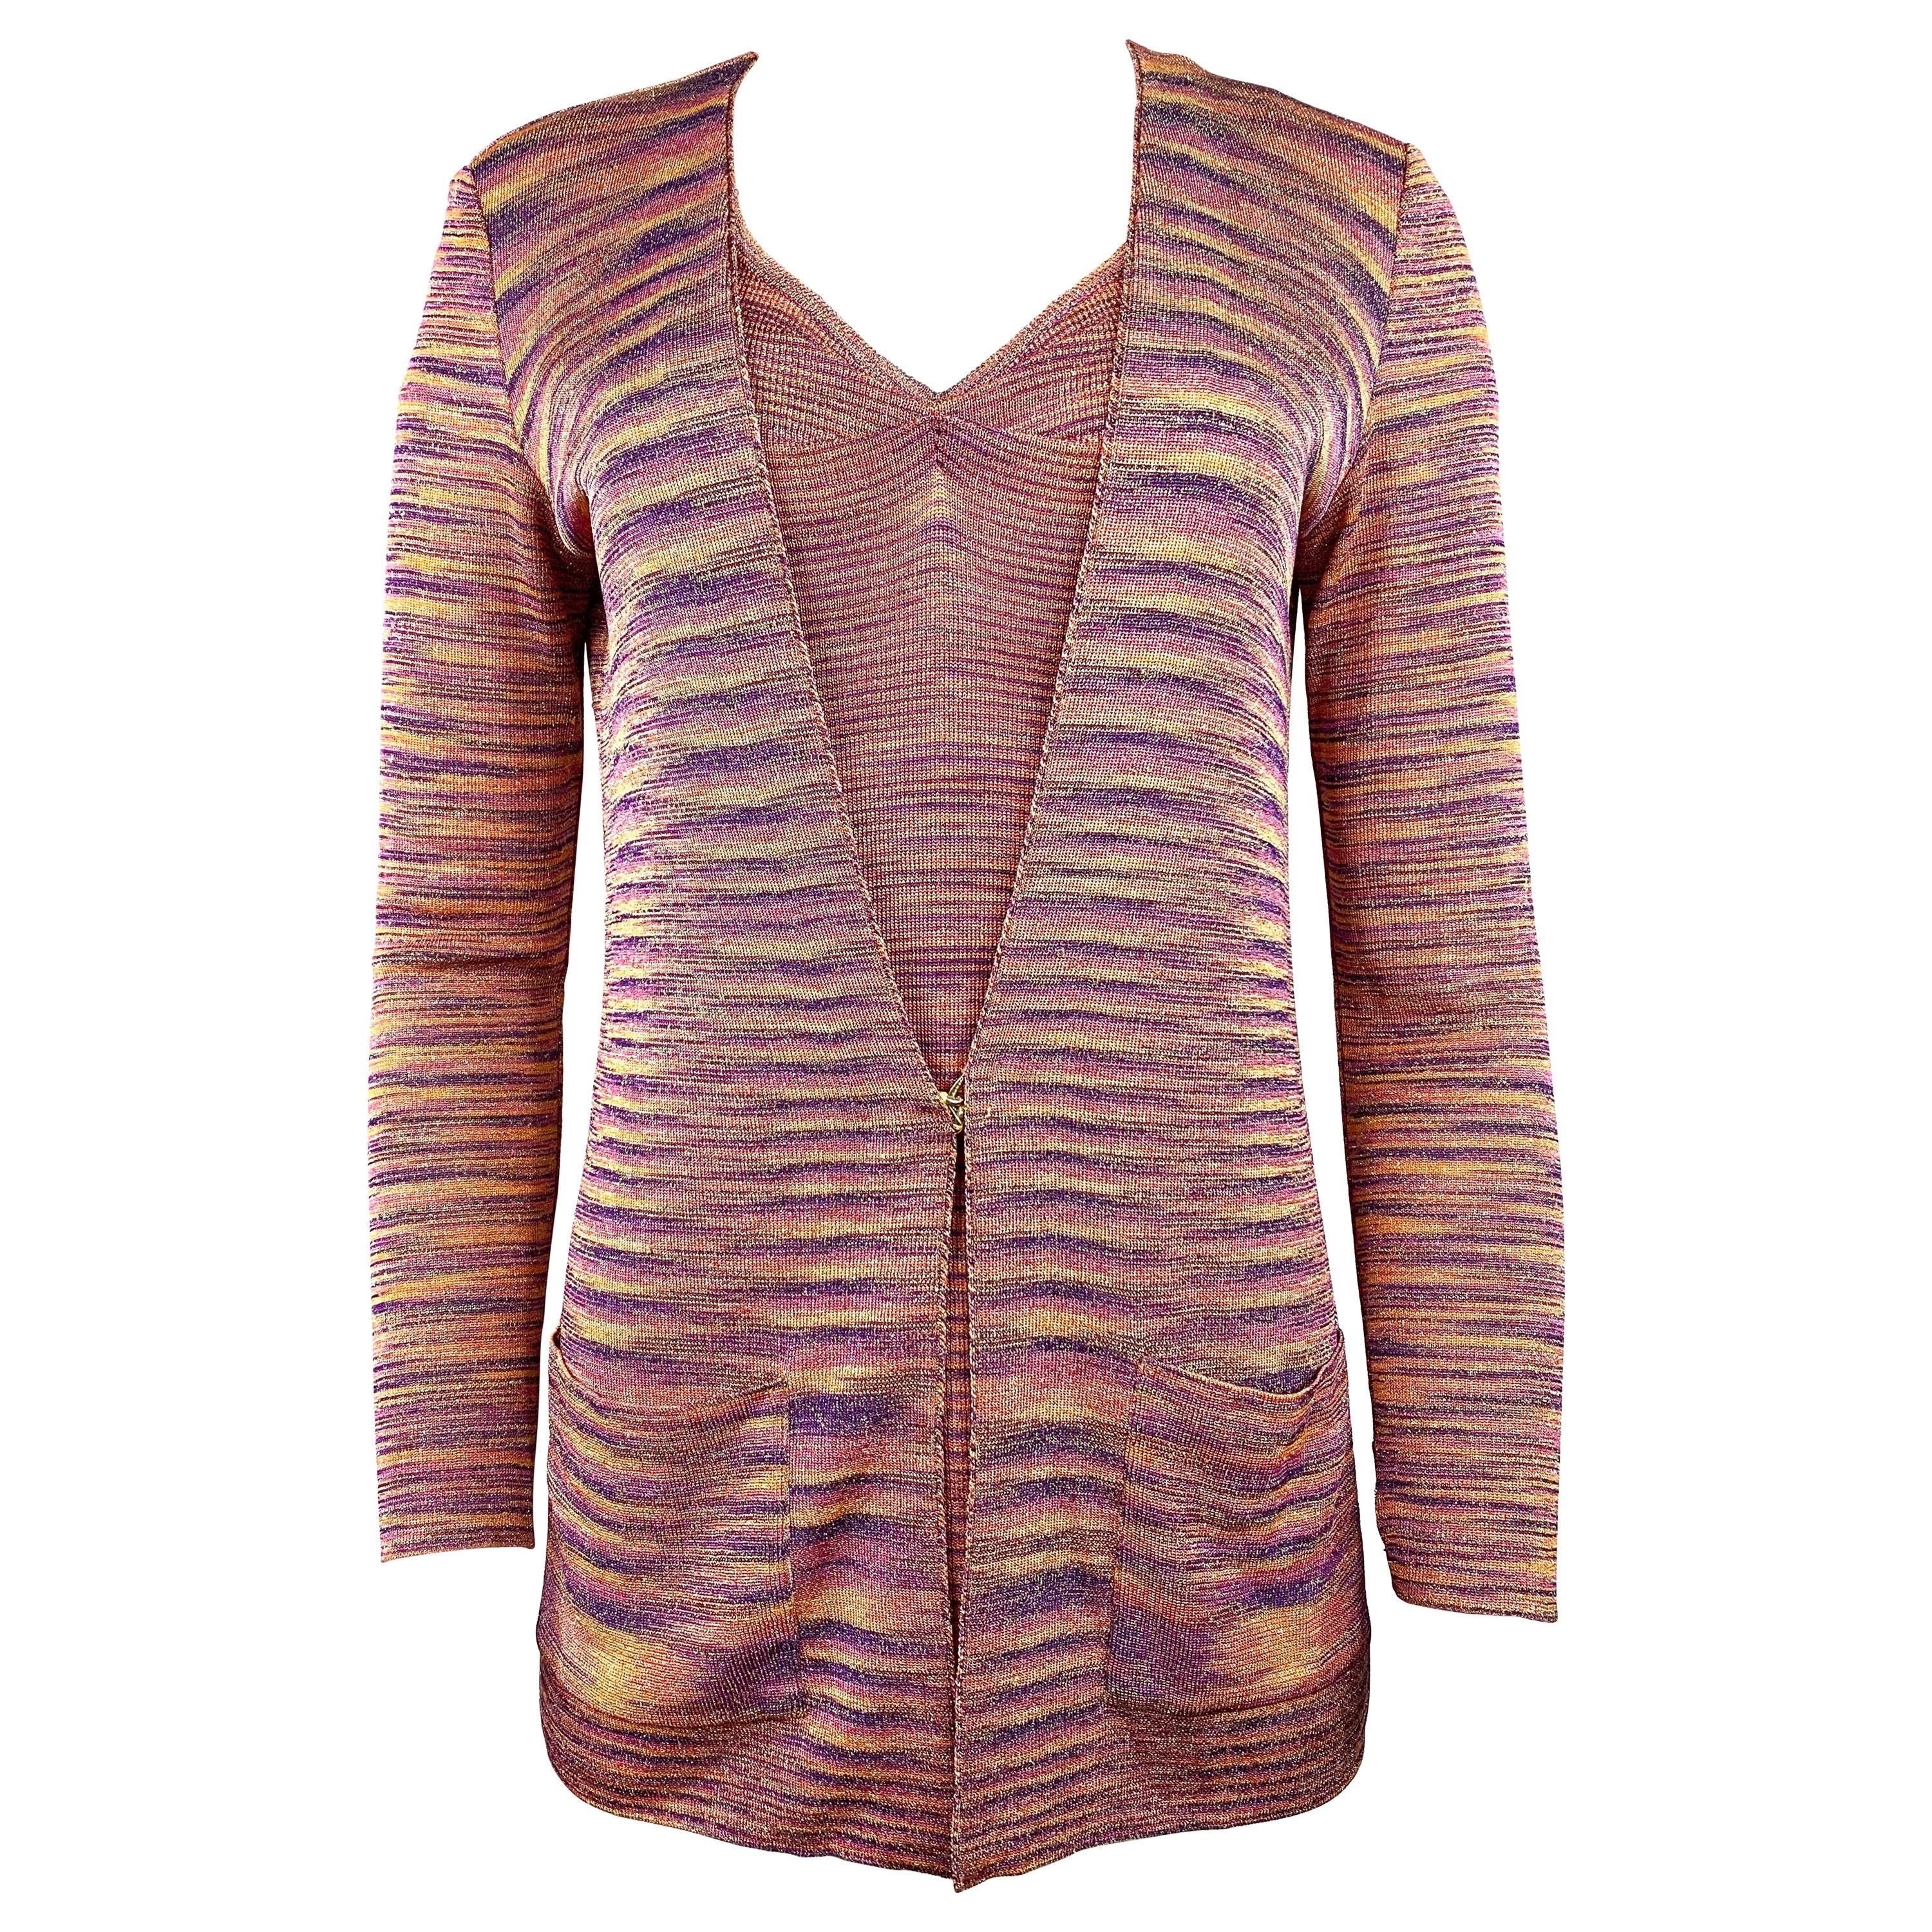 Missoni Multicolor Knit Sleeveless Top and Cardigan Set Size 40